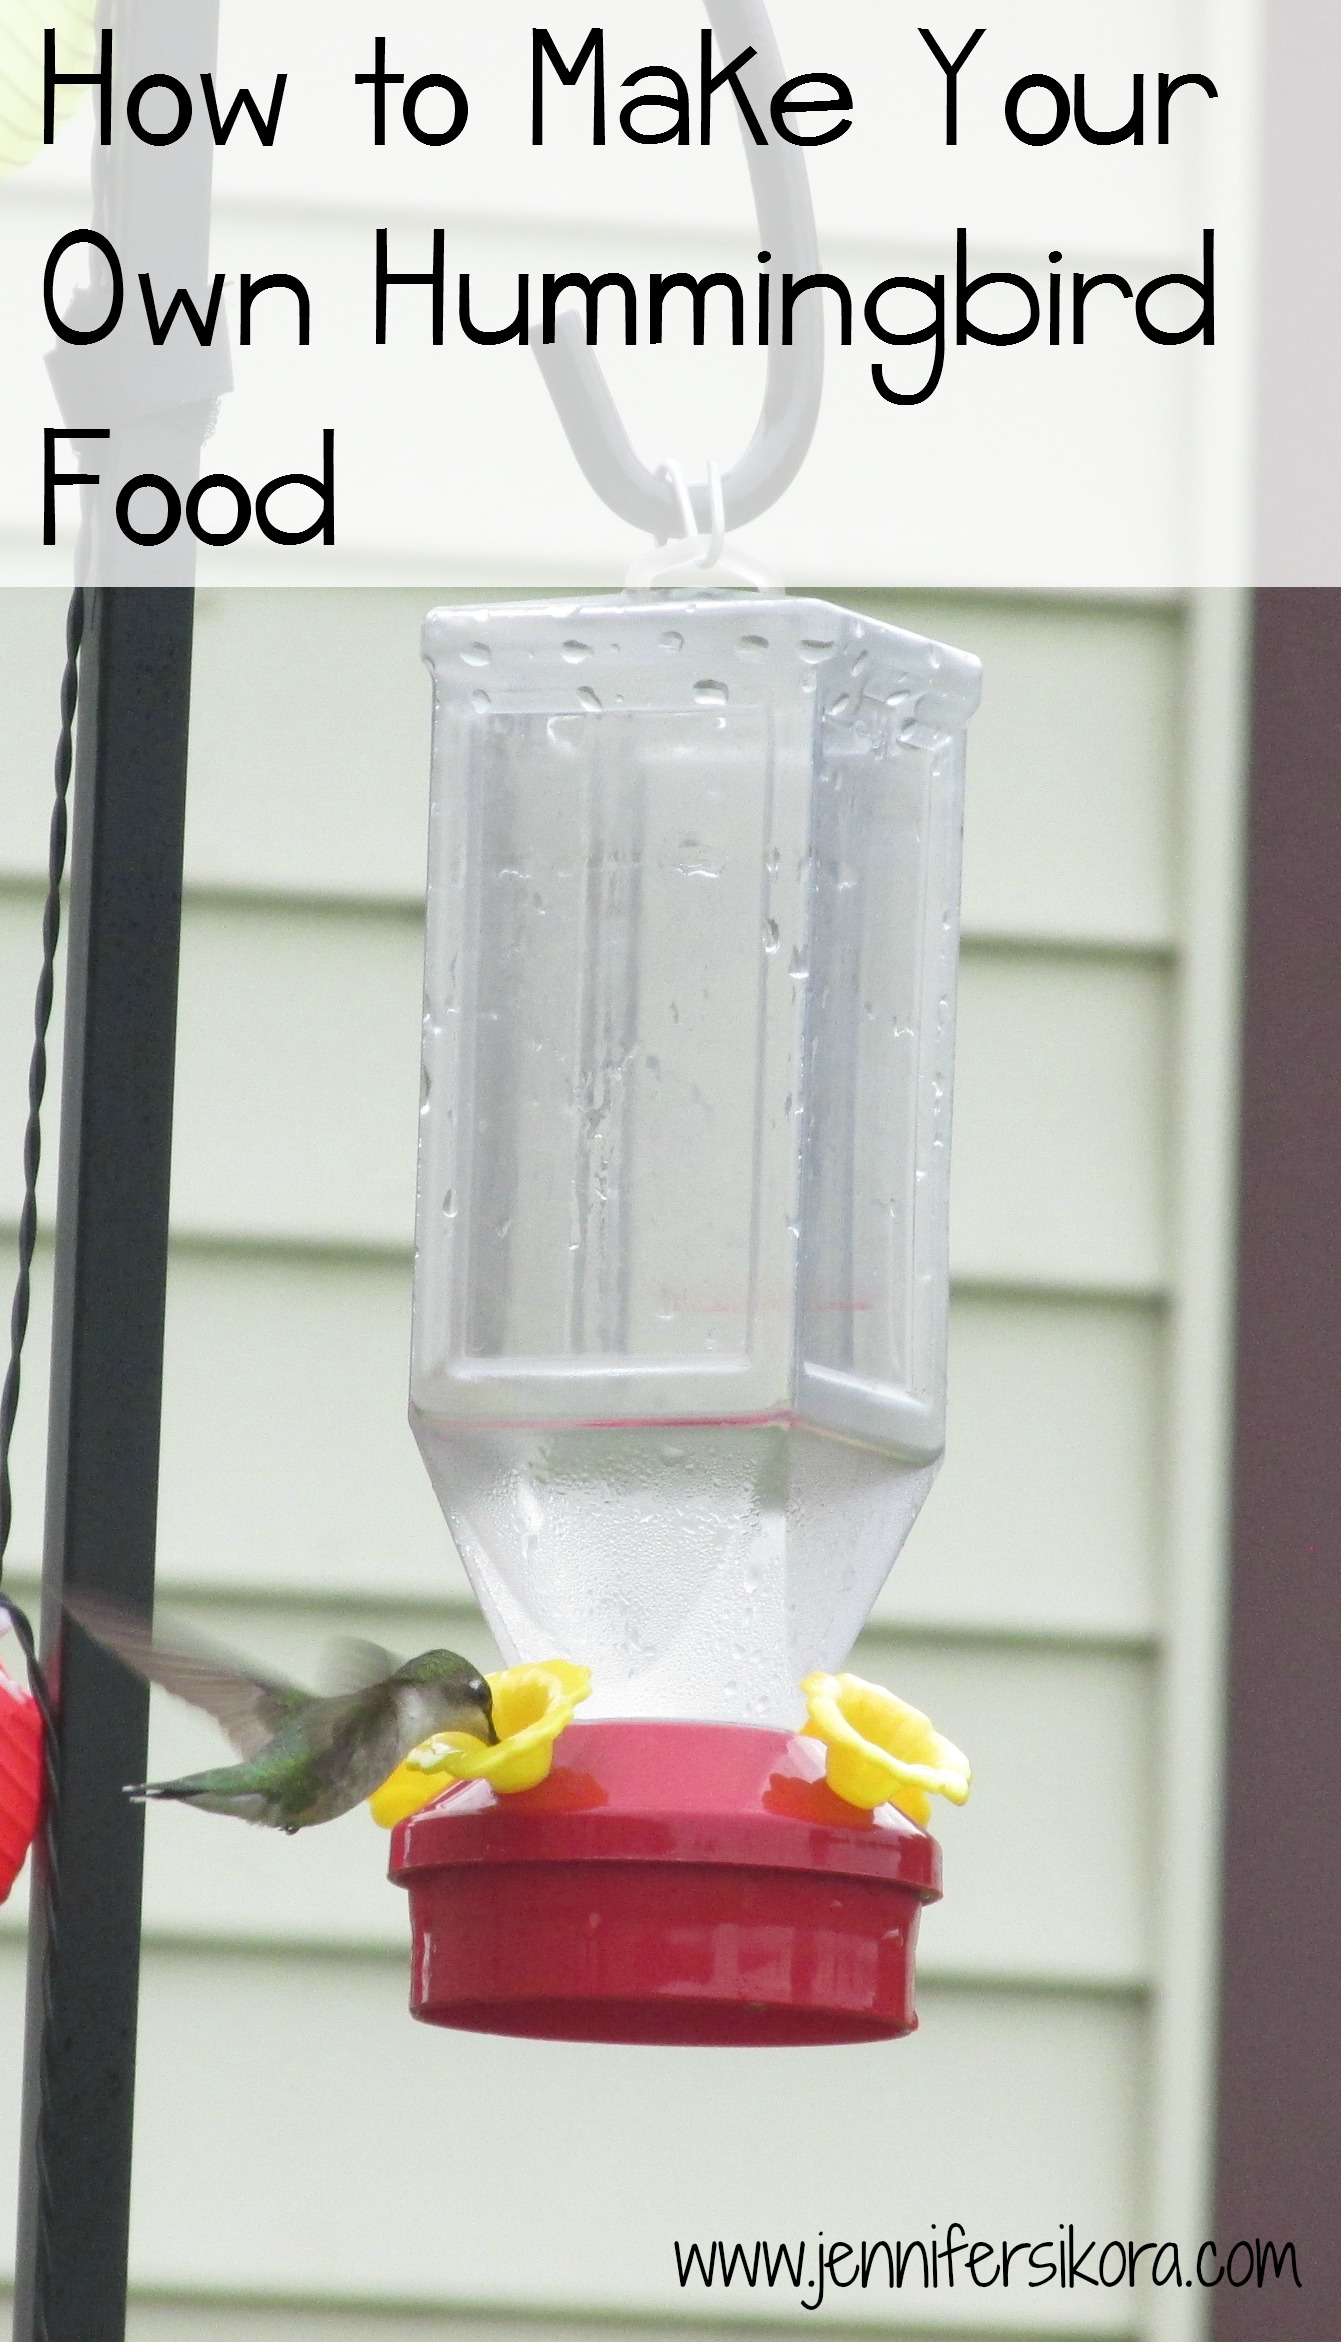 How to Make Your Own Hummingbird Food